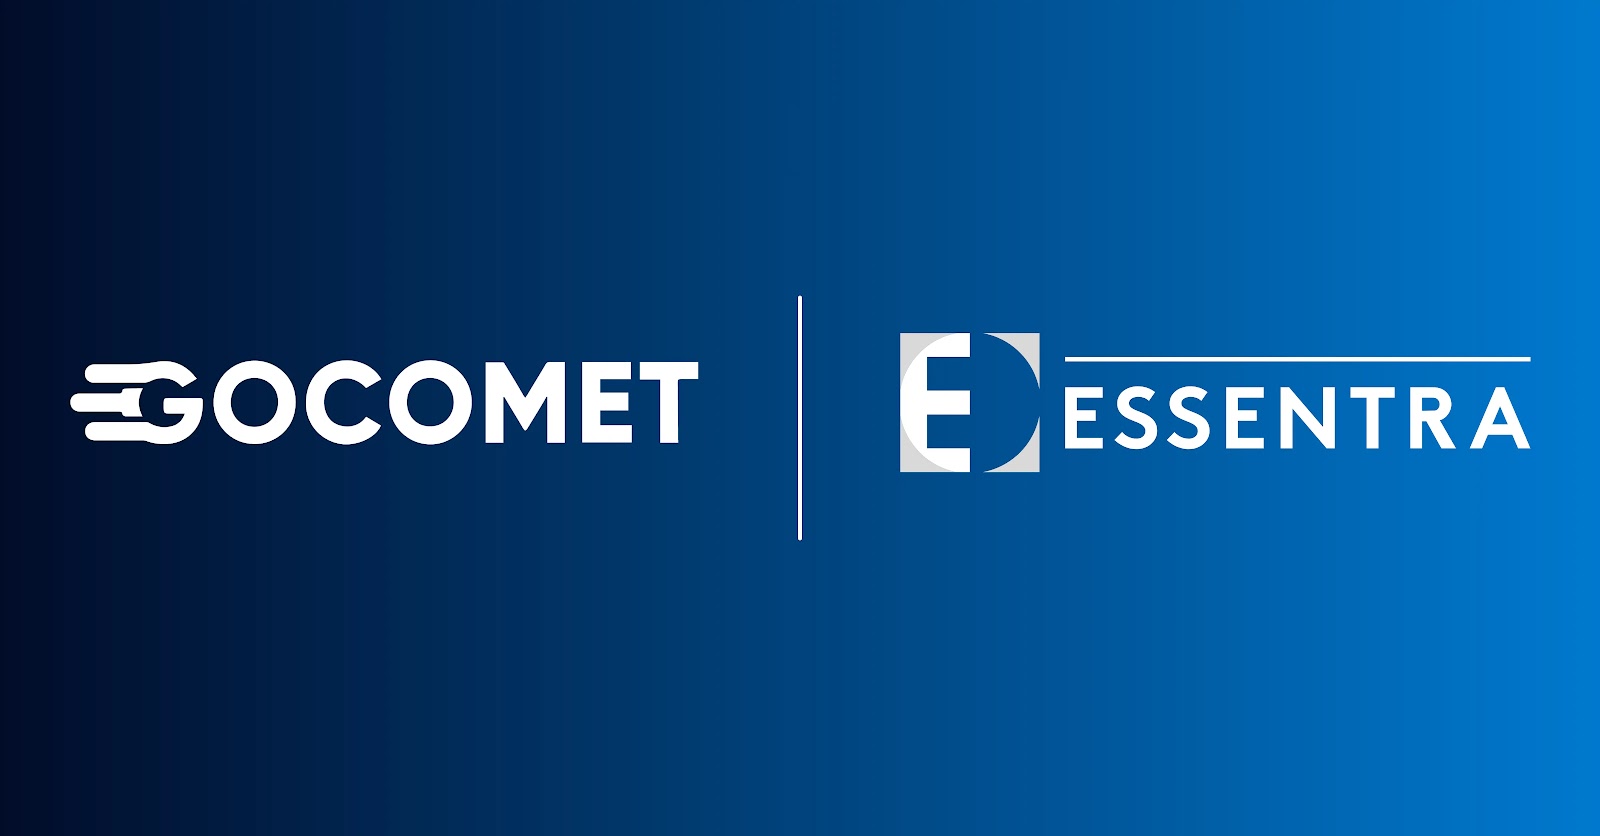 Essentra Saves Nearly $150K and Hundreds of Hours with GoComet article publisher's logo